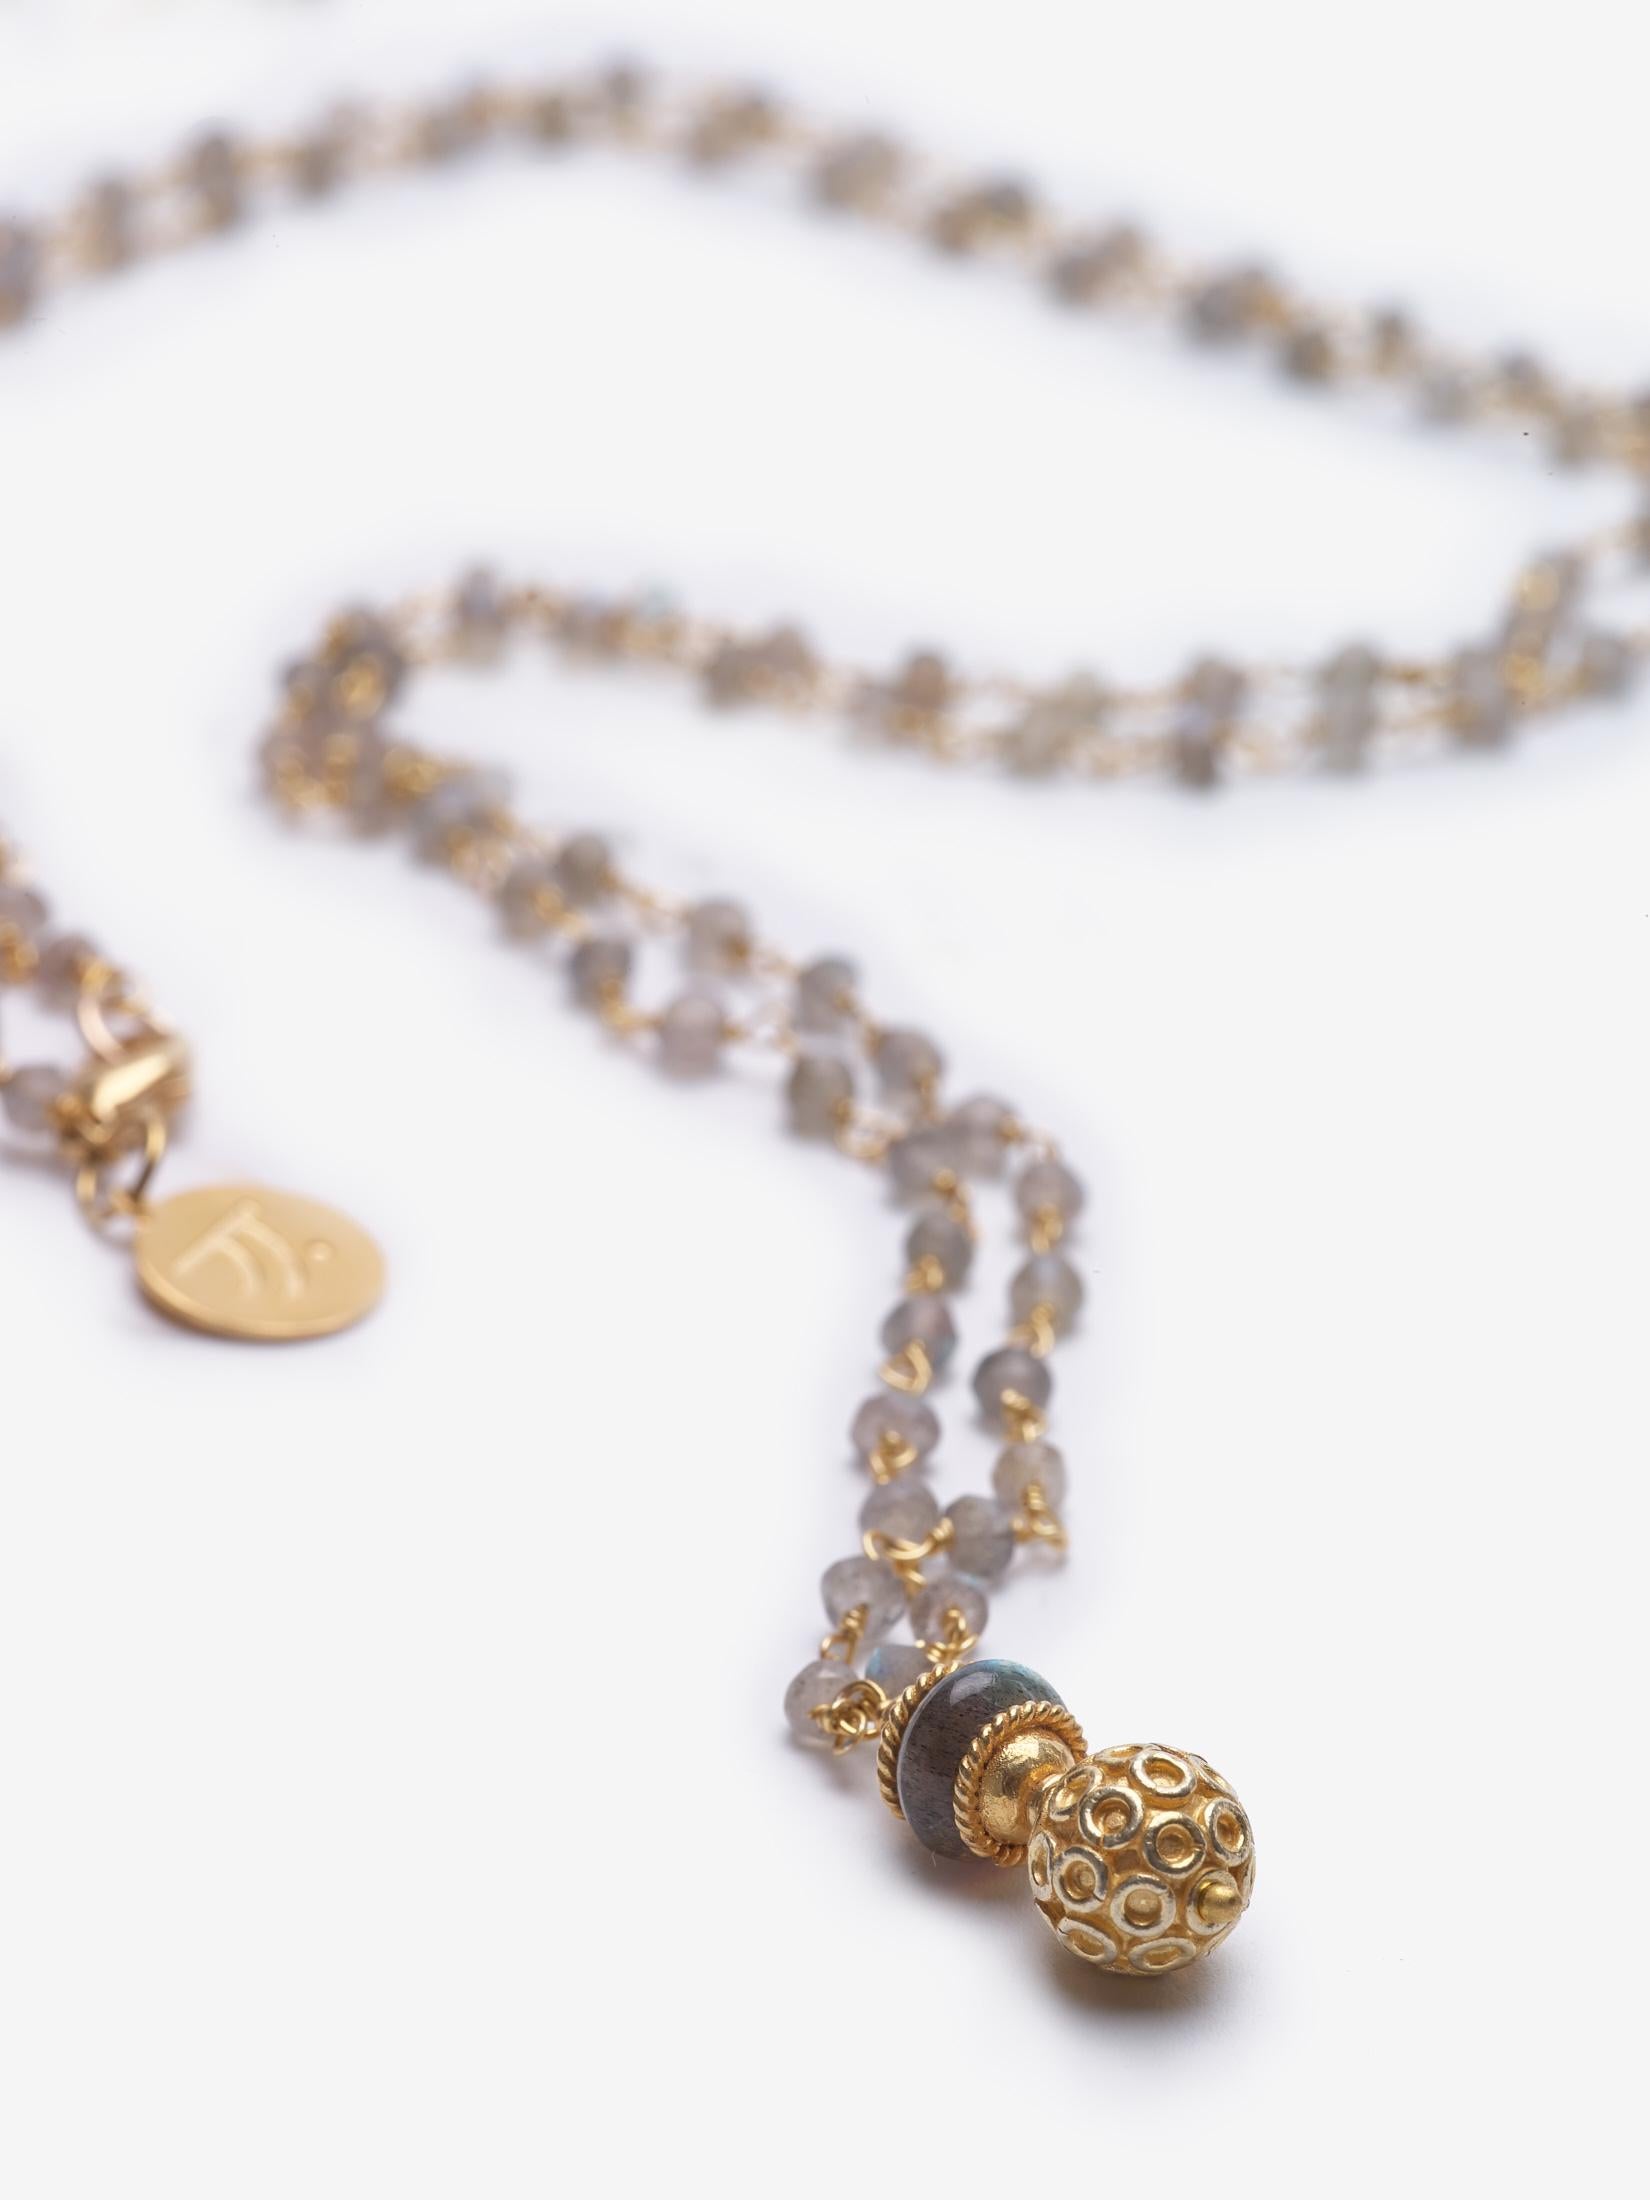 Story Behind the Jewelry
The necklace is symbolic of the pagodas which pepper the landscapes of south east asia.  The necklace is comprised of a beautiful labradorite 14K gold filled gemstone chain.
Properties
Labradorite is a transformational stone